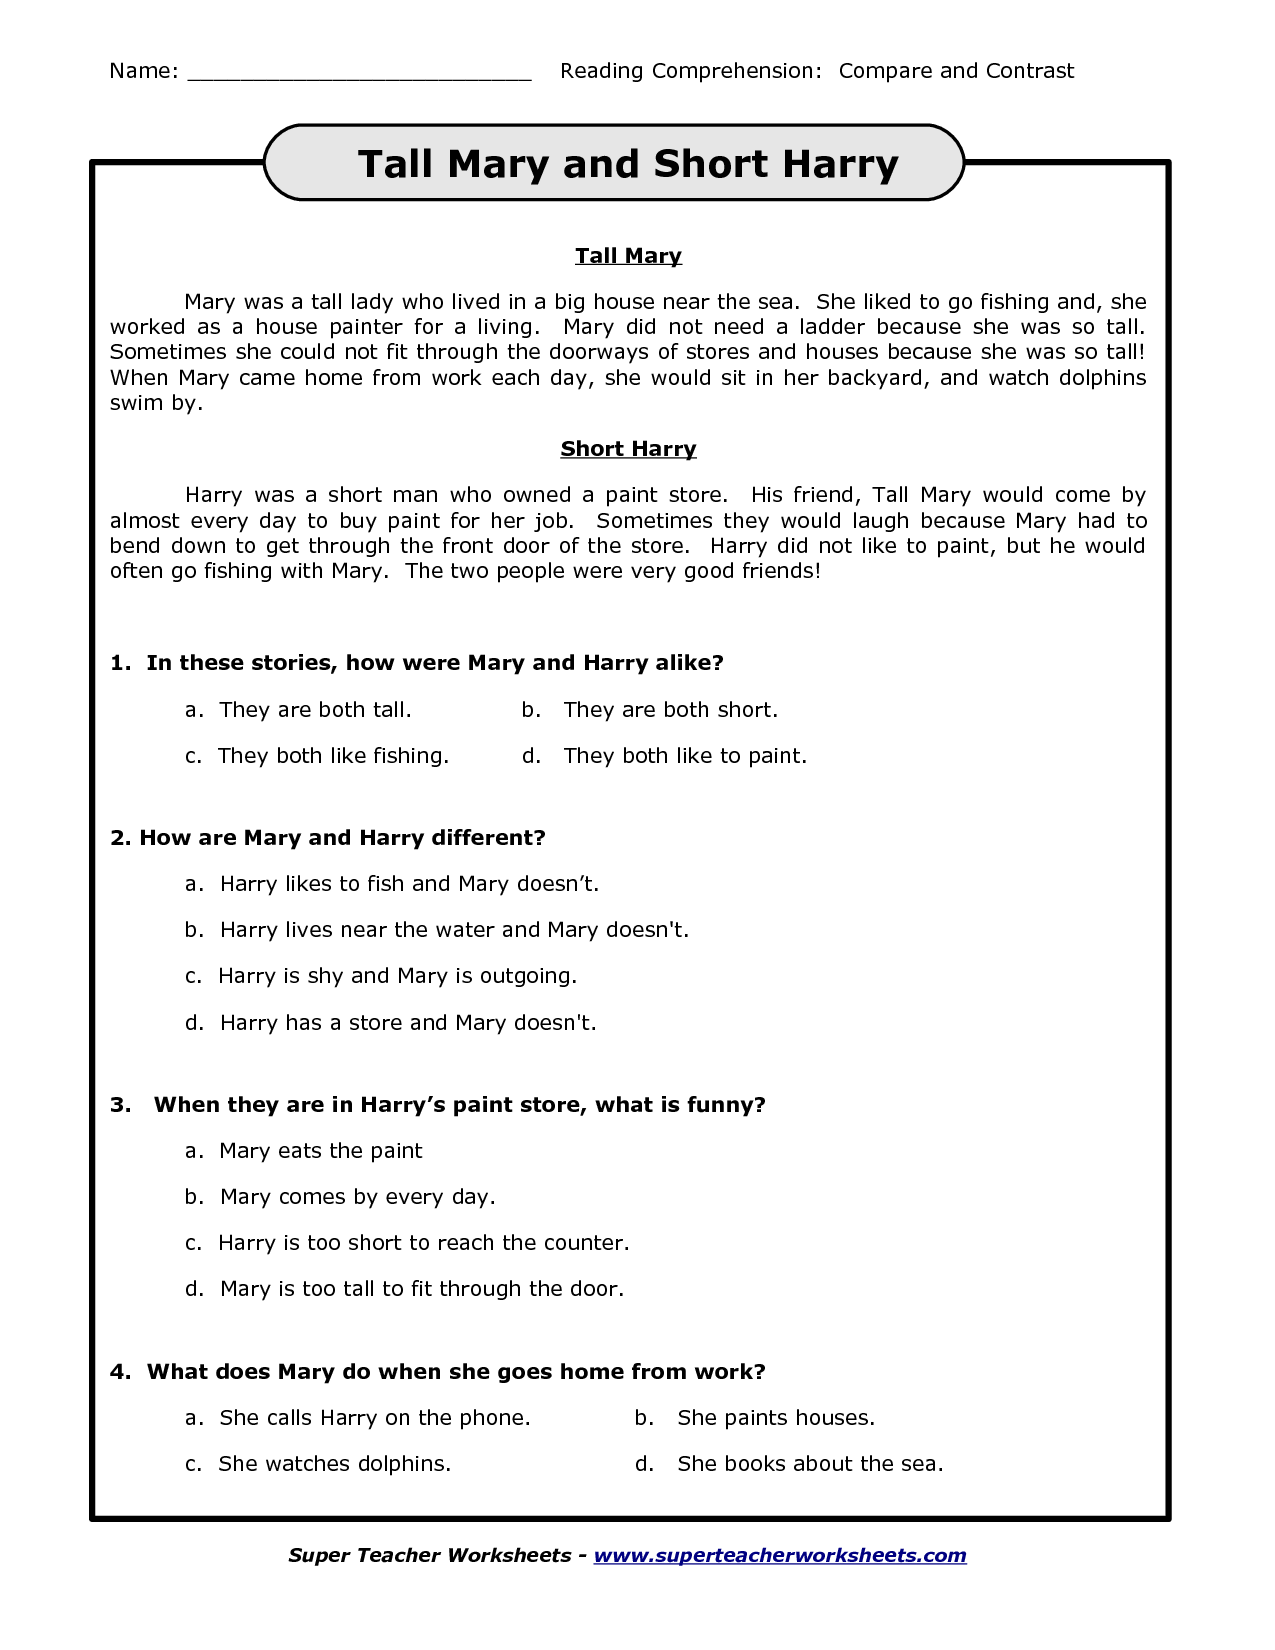 Compare and Contrast Worksheets 3rd Grade